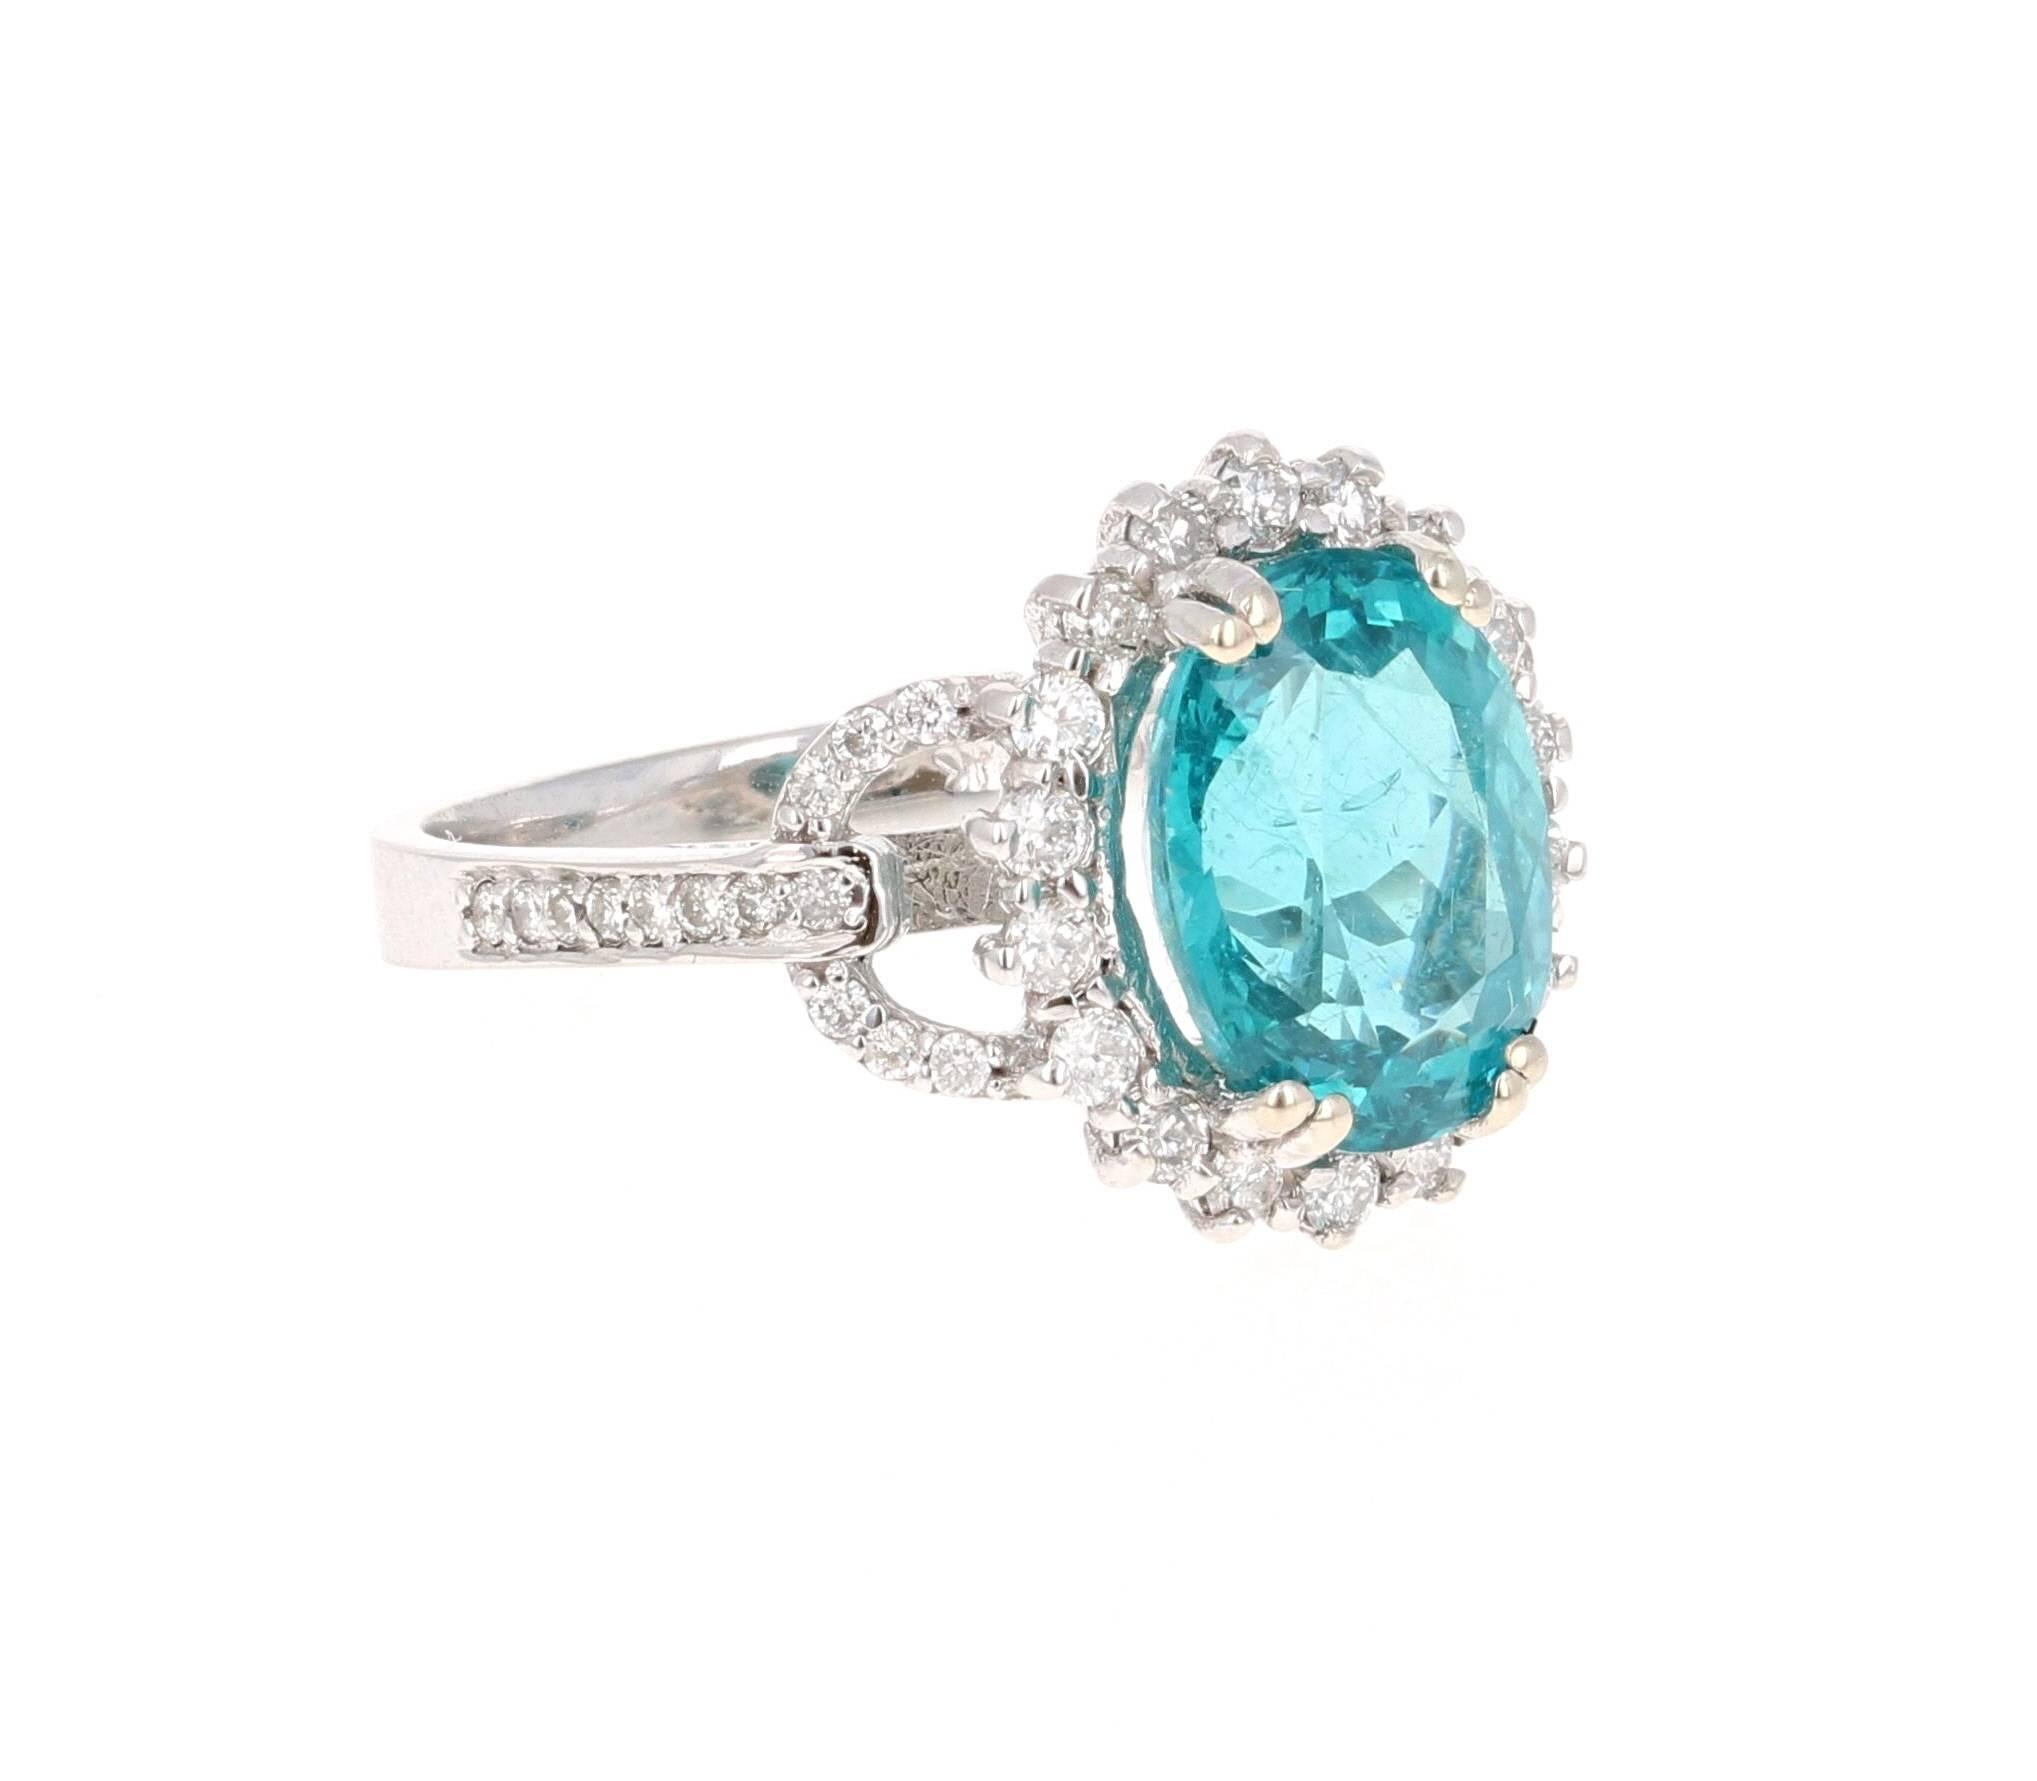 4.81 Carat Oval Cut Apatite Diamond White Gold Engagement Ring!

Gorgeous Apatite and Diamond Ring.  This ring has a 4.22 carat Oval-Cut Apatite in the center of the ring and is surrounded by 46 Round Cut Diamonds that weigh 0.59 carat.  The total